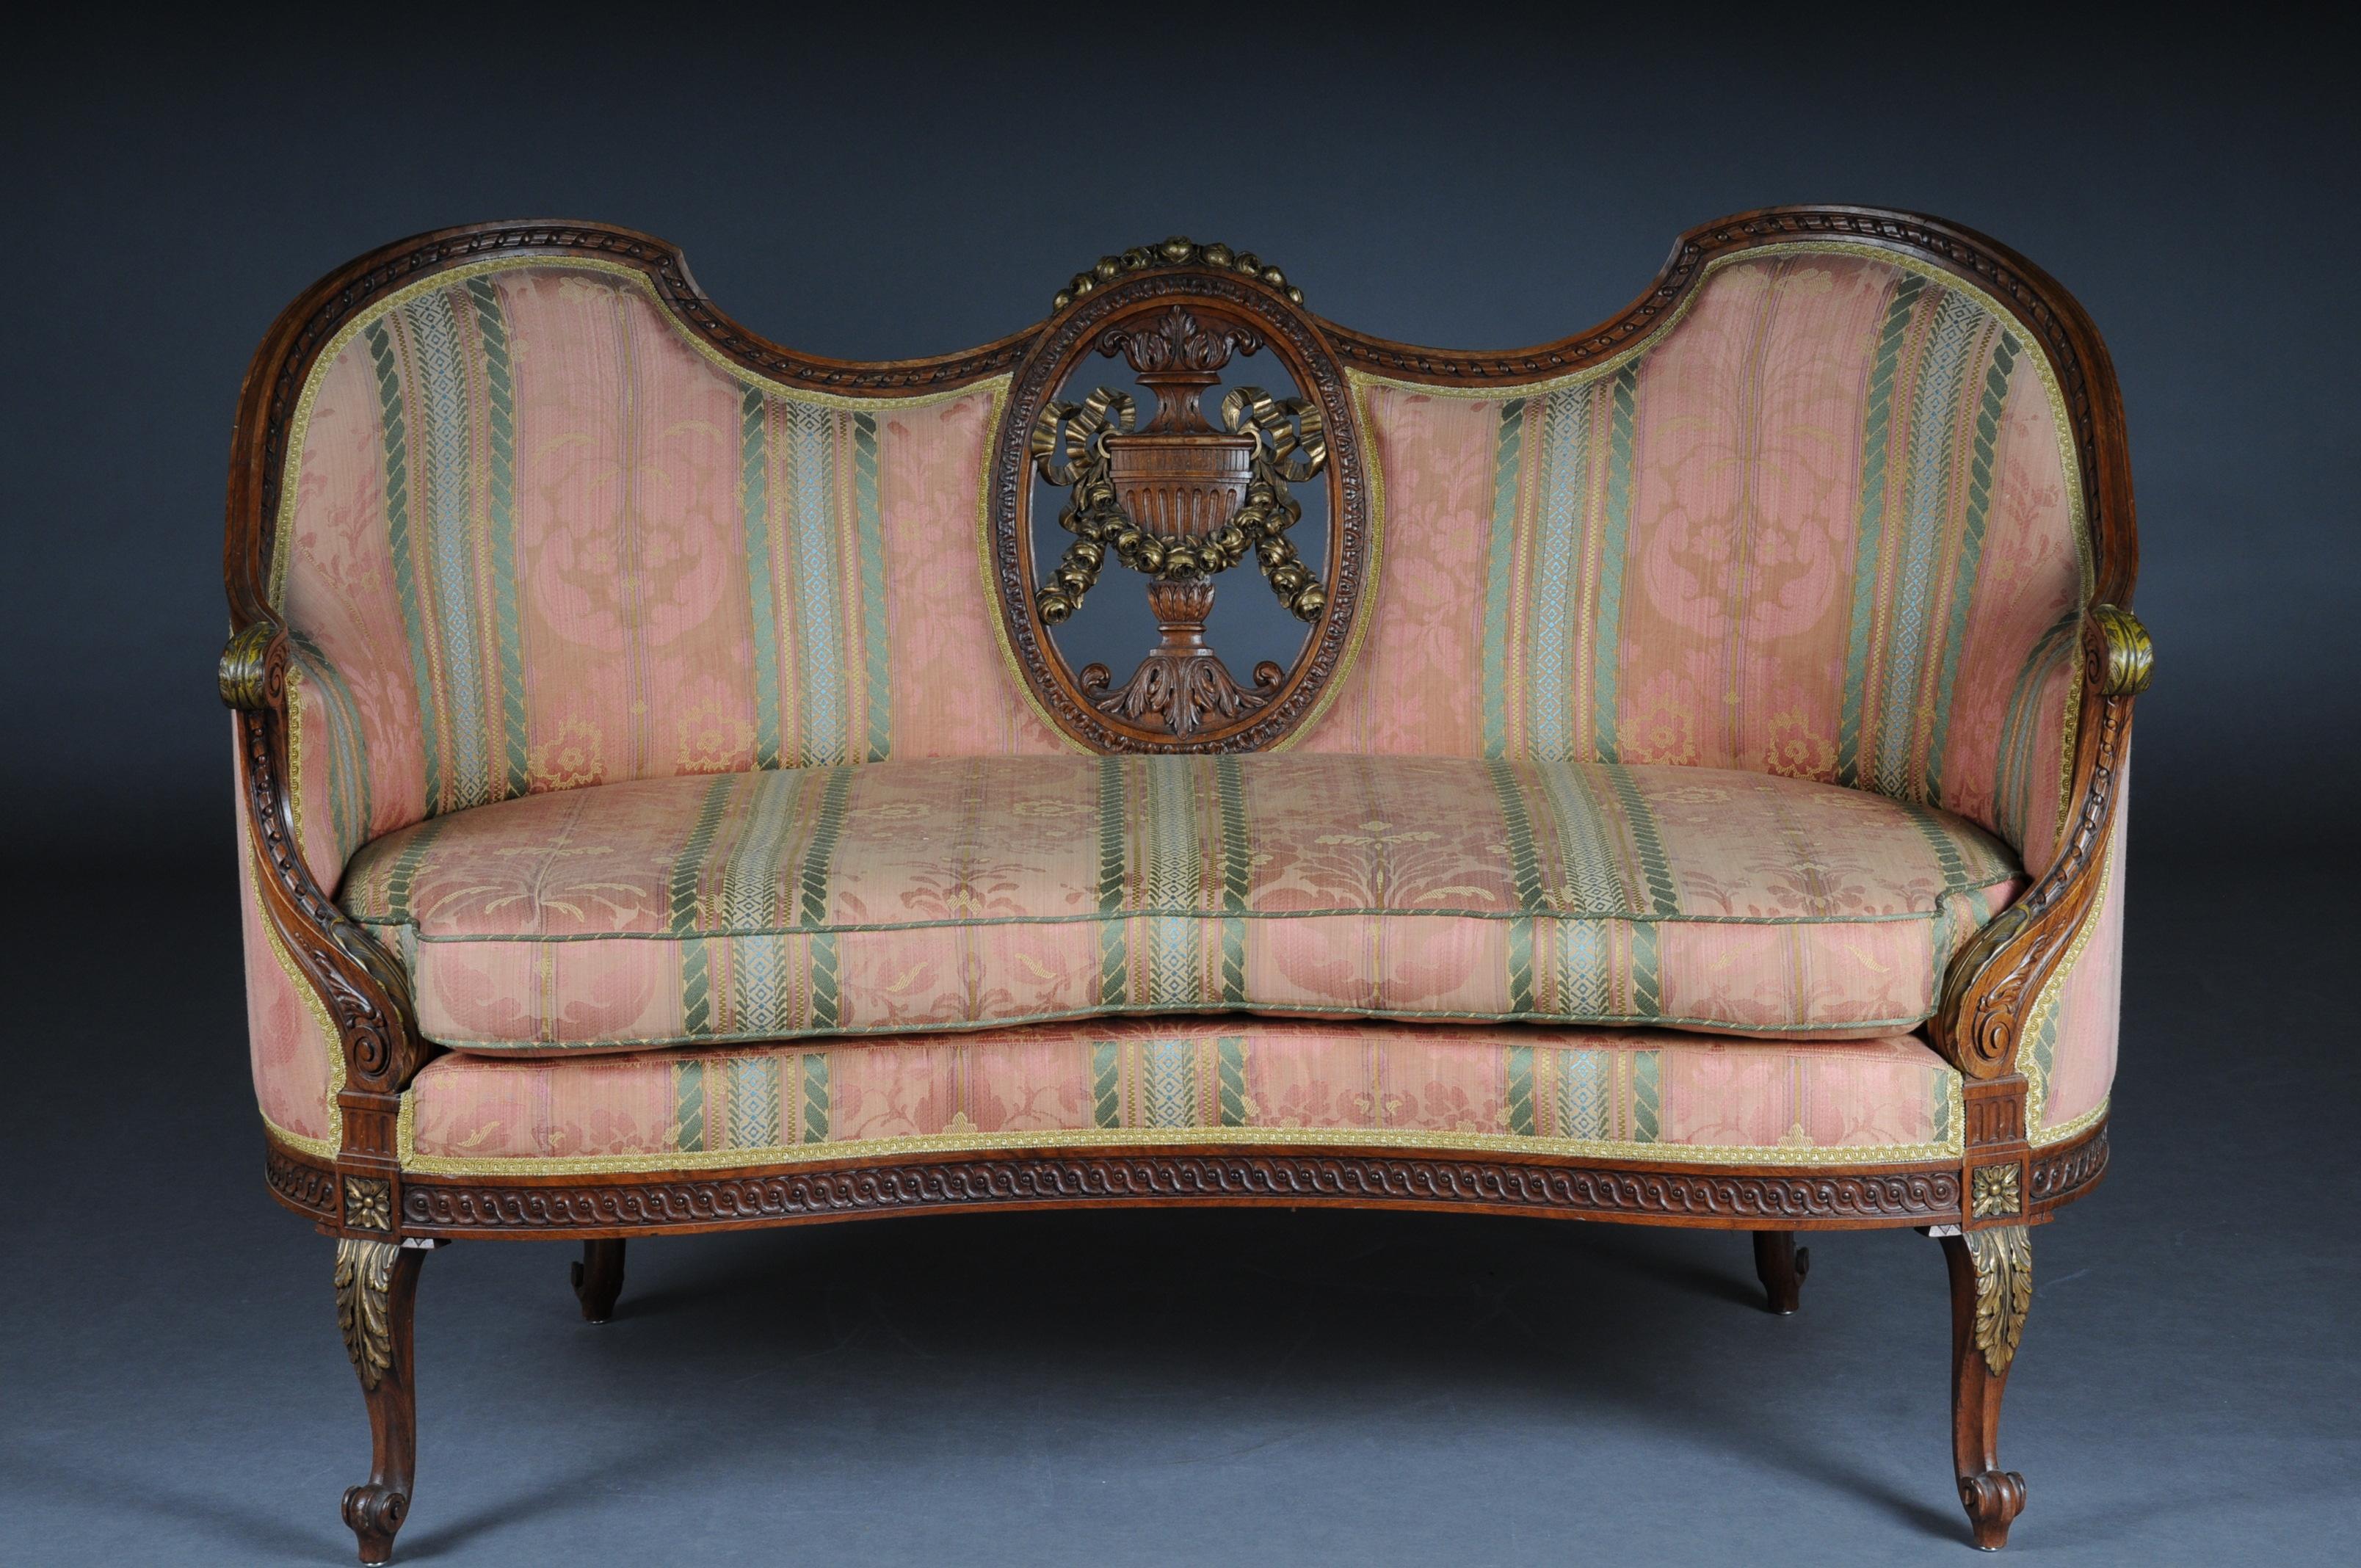 French sofa group canape and 2 Bergeren, circa 1900

Solid beechwood, carved and partly gilded. Semicircular rising, curved backrest framing. Centered medallion decorated with an amphora and garland Appropriately curved frame with richly carved